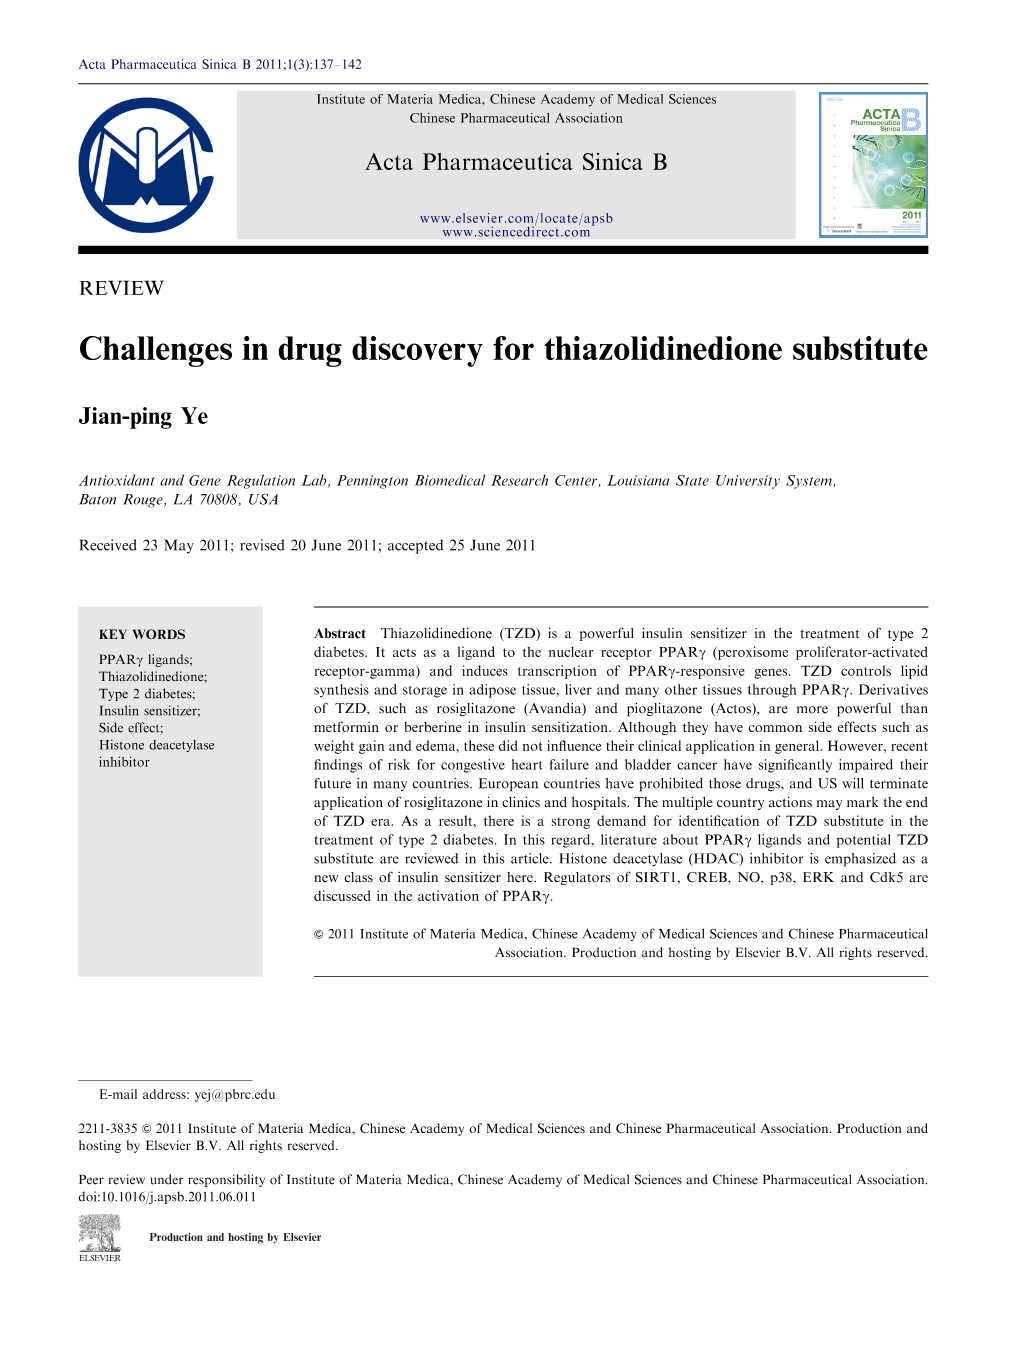 Challenges in Drug Discovery for Thiazolidinedione Substitute